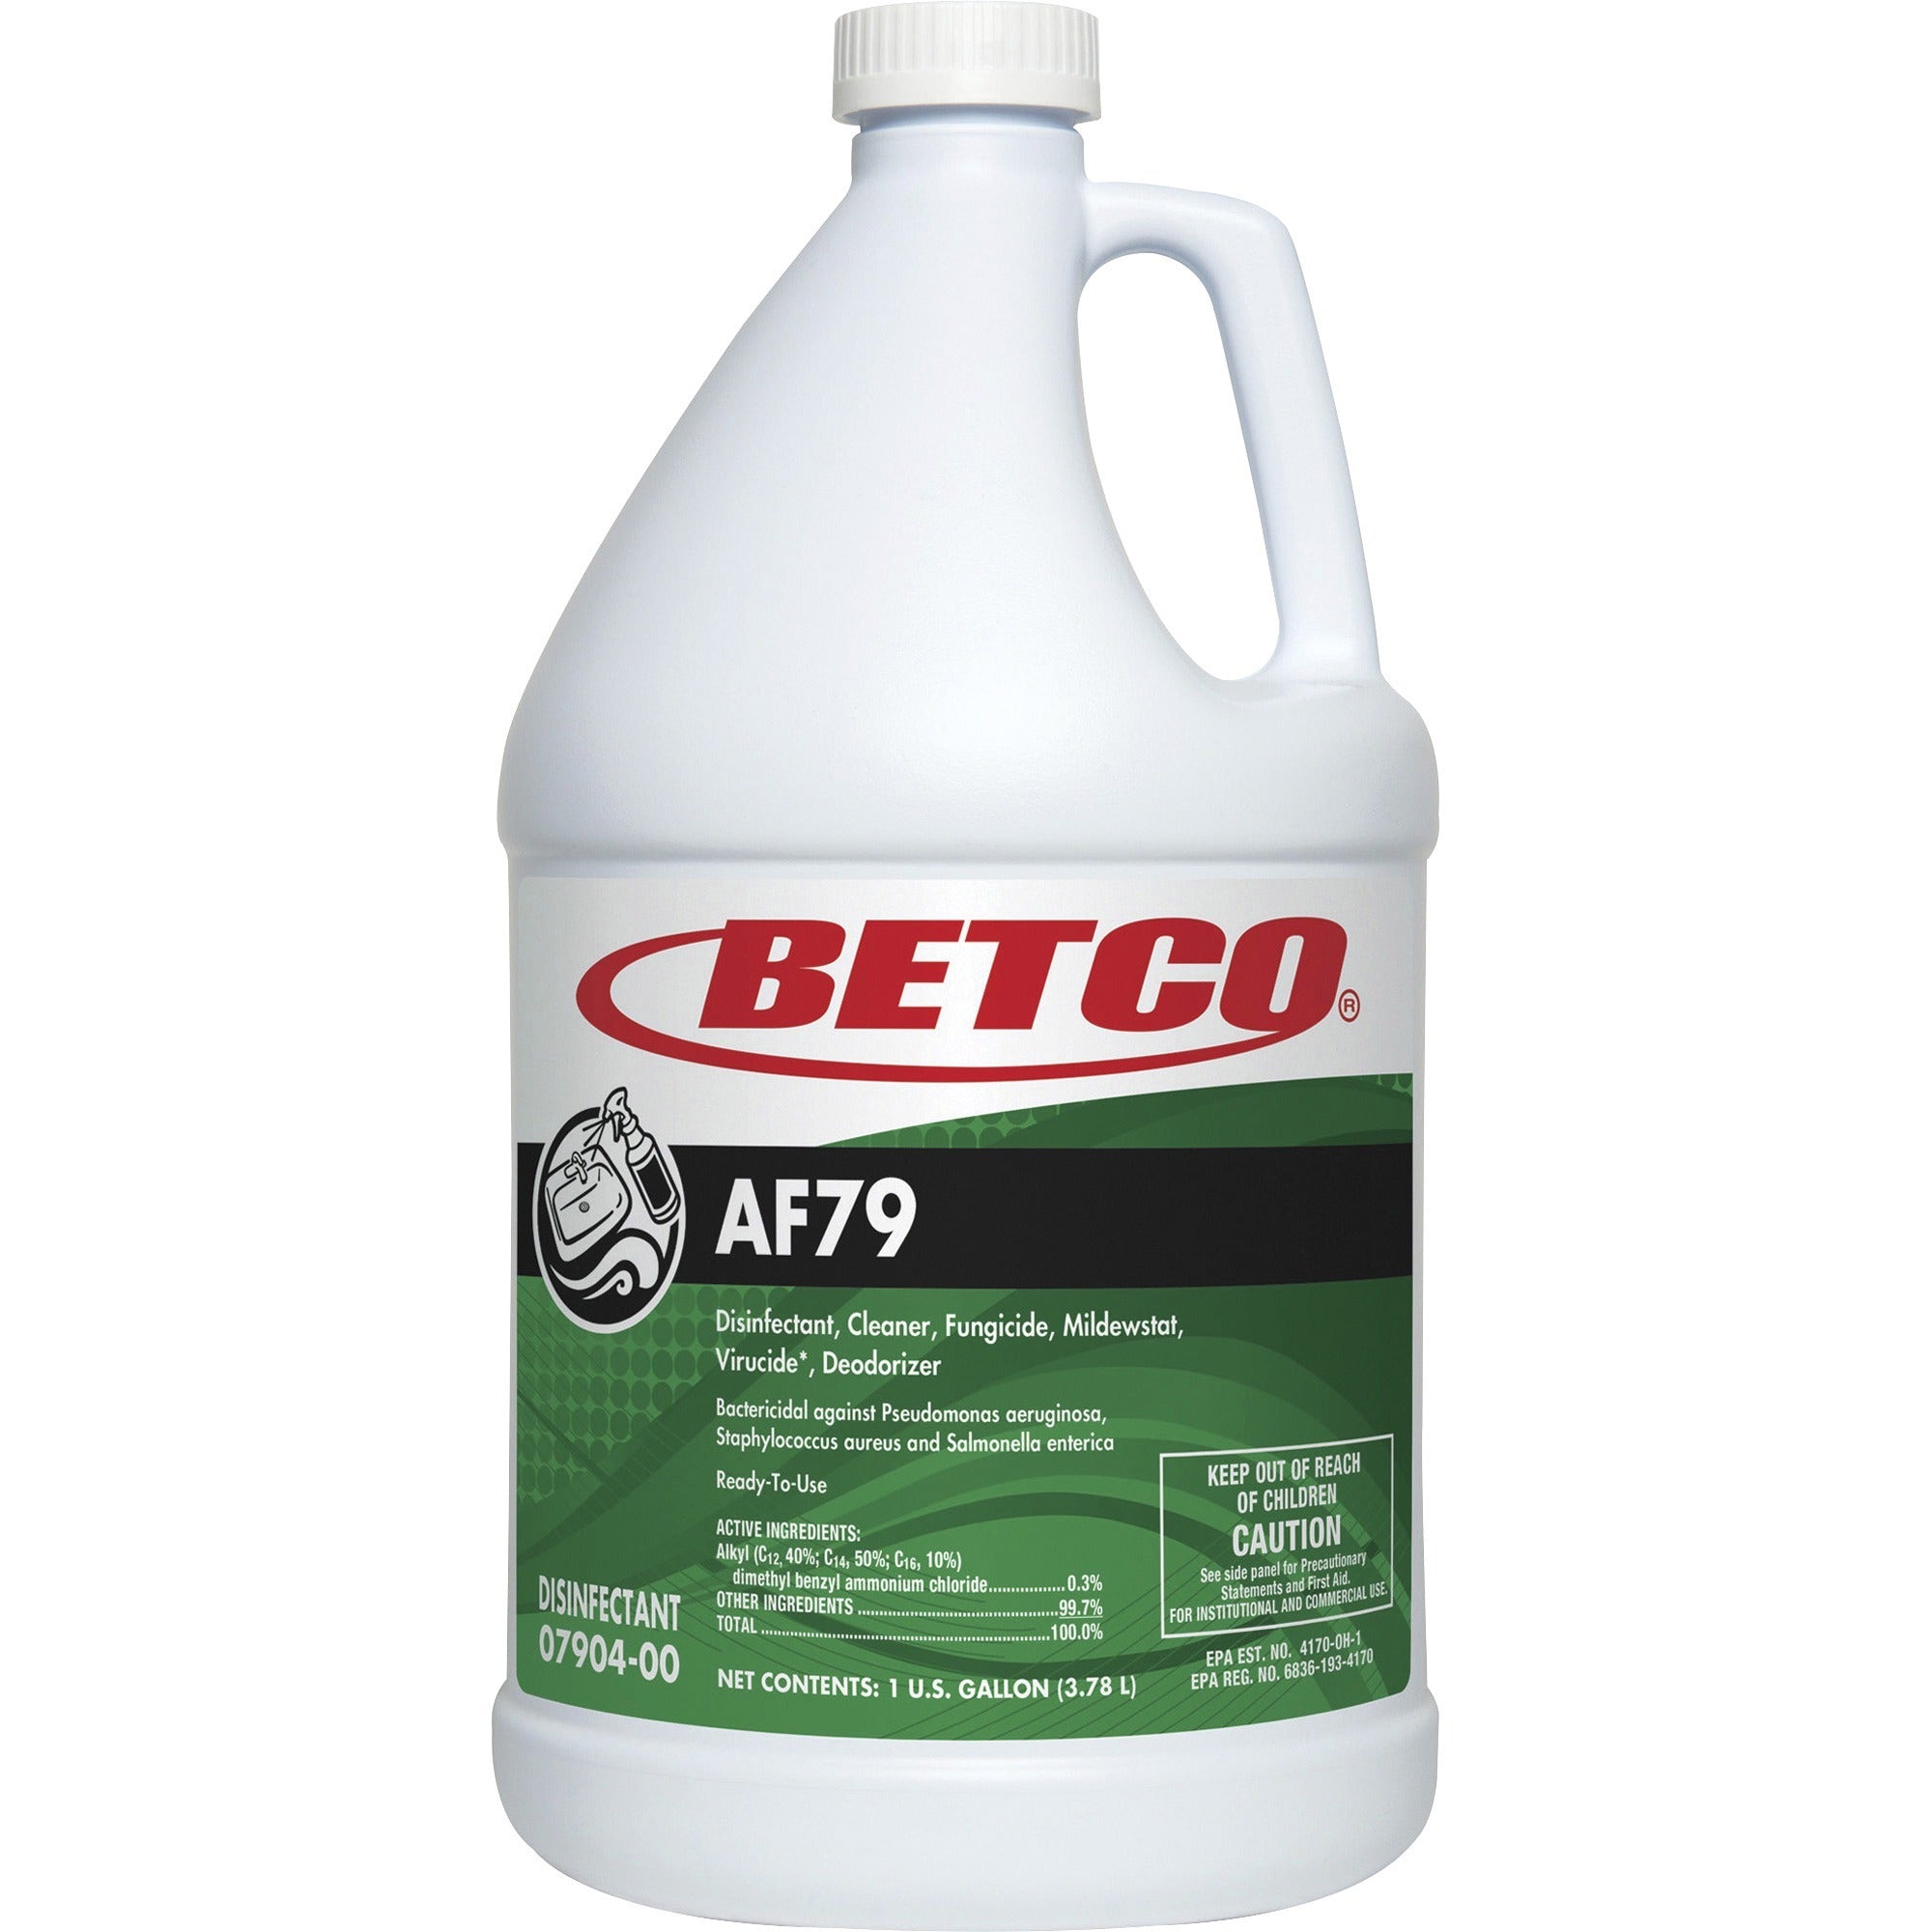 Betco AF79 Acid-Free Restroom Cleaner - Ready-To-Use - 128 fl oz (4 quart) - Citrus Bouquet Scent - 4 / Carton - Disinfectant, Deodorize, Long Lasting, Rinse-free - Clear Blue - 2